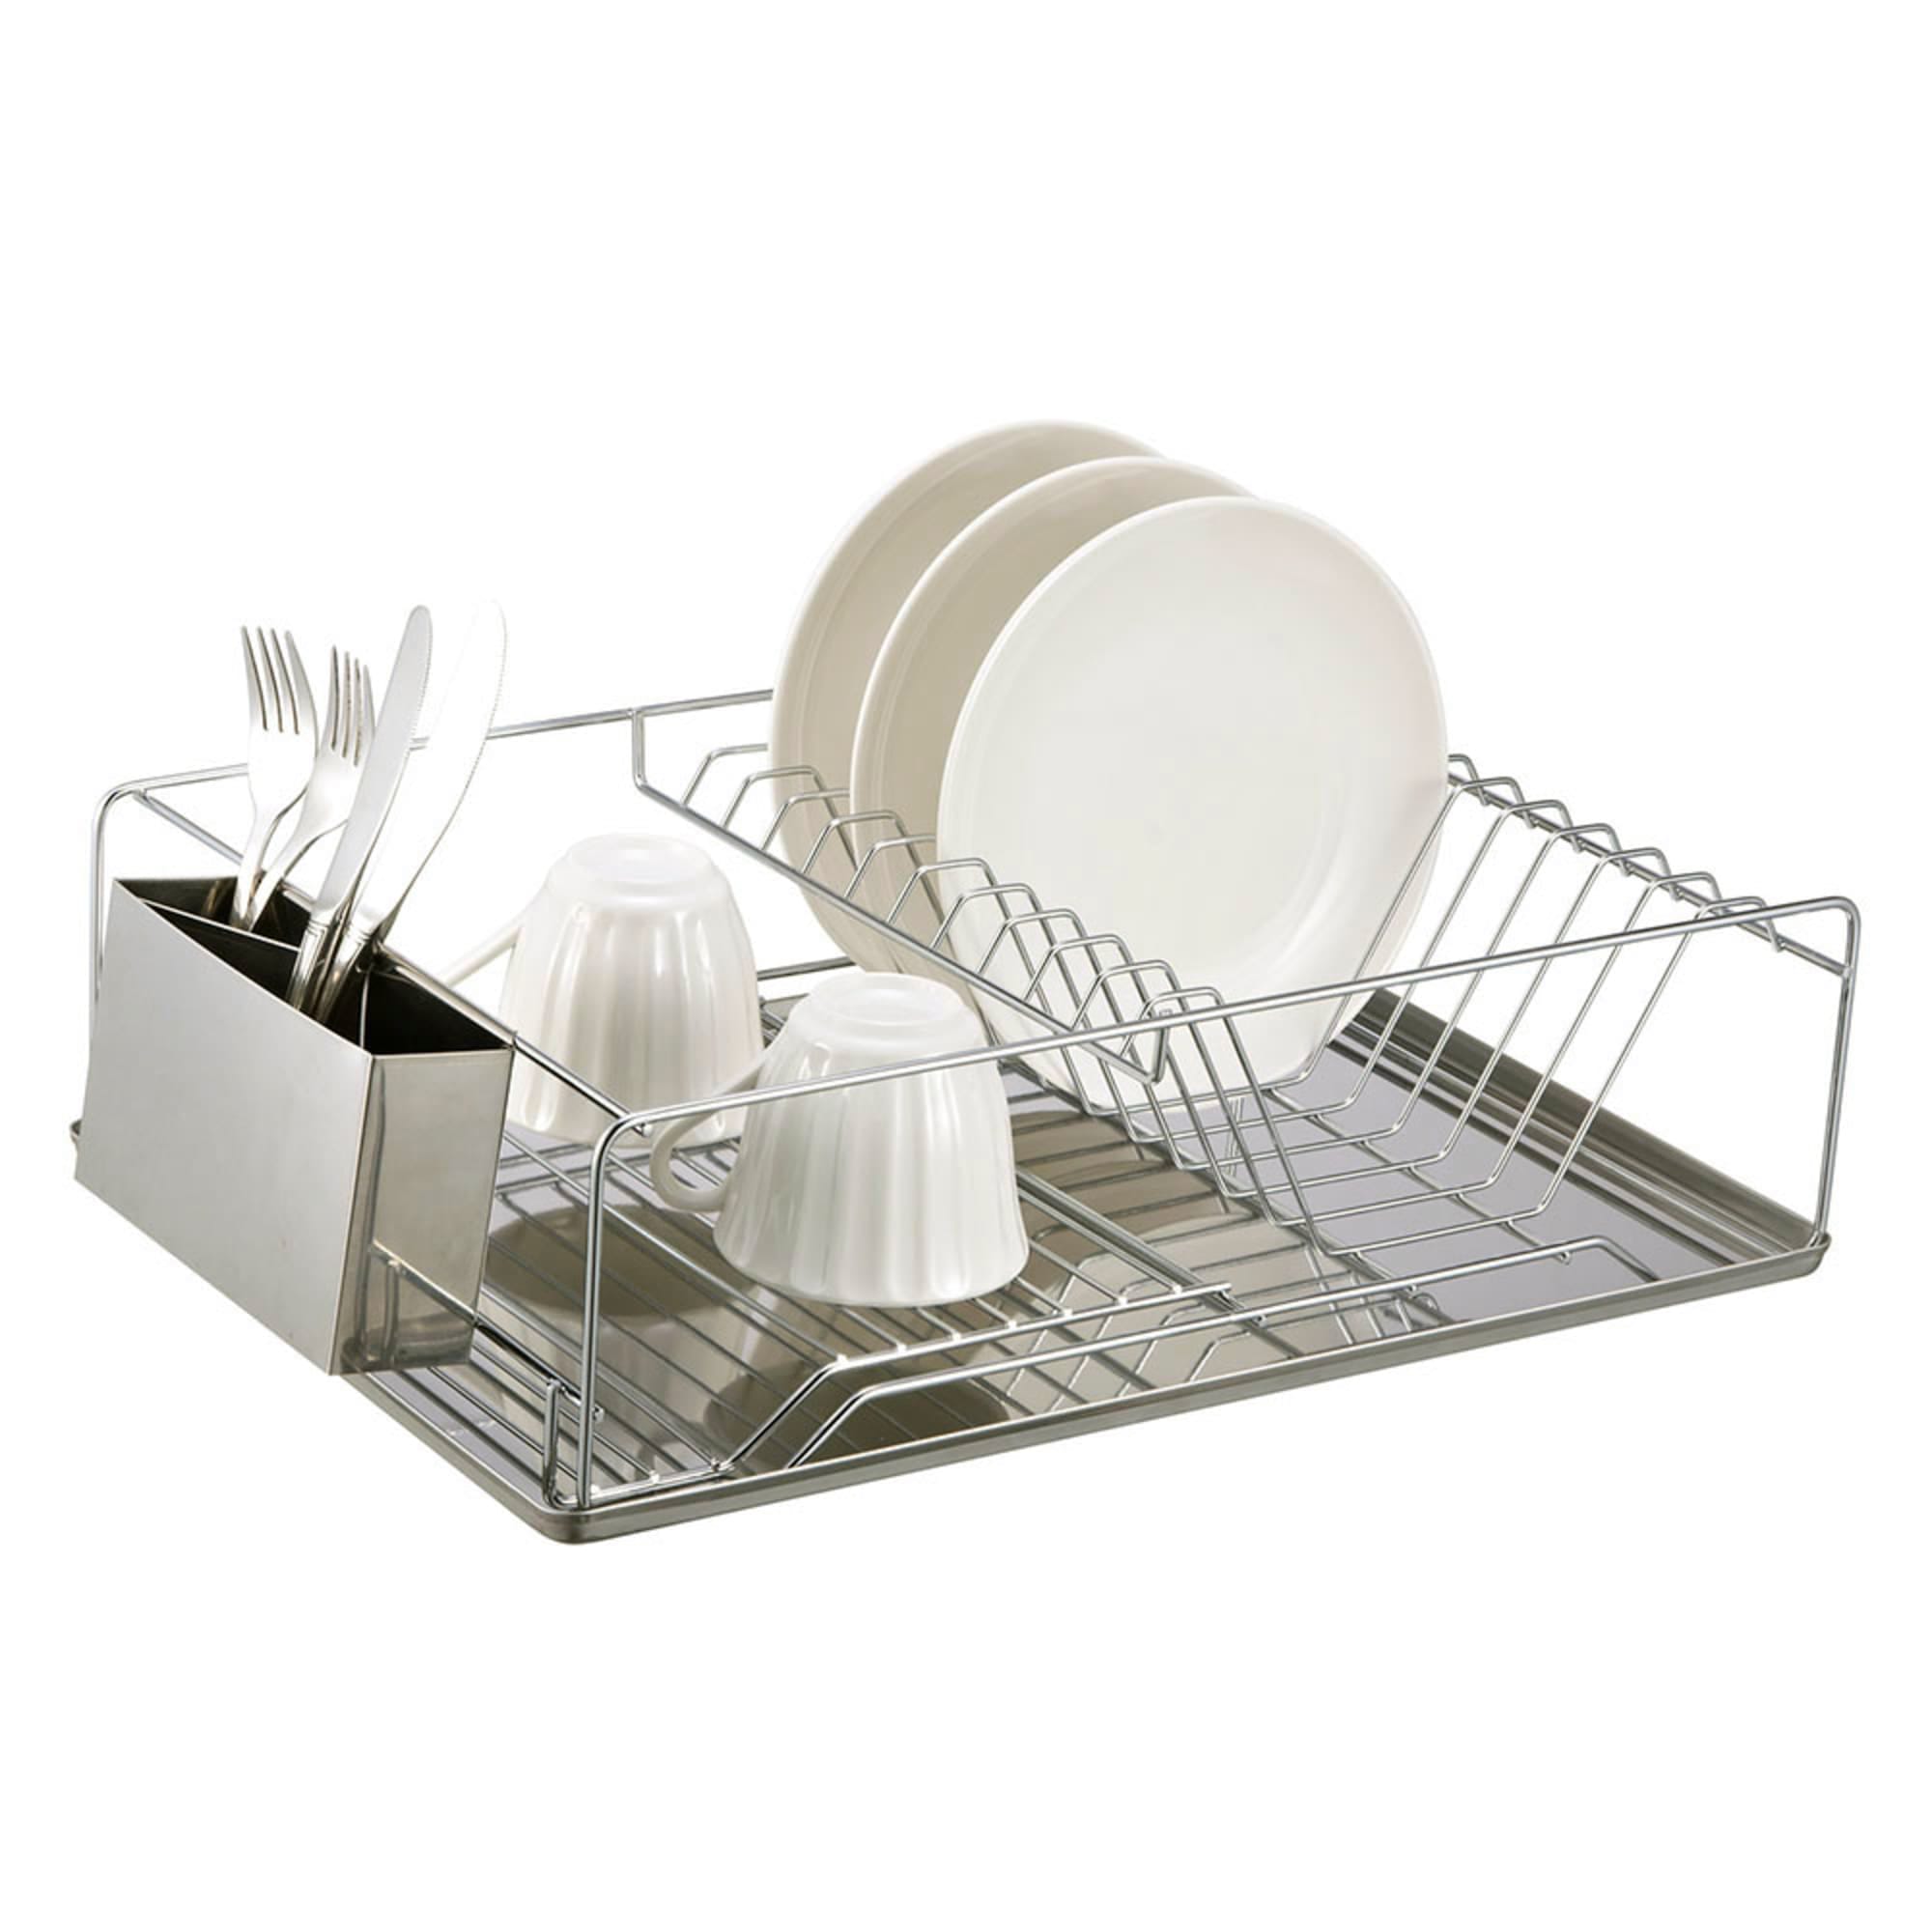 Home Basics Chrome Plated Steel Dish Rack with Tray $20.00 EACH, CASE PACK OF 6